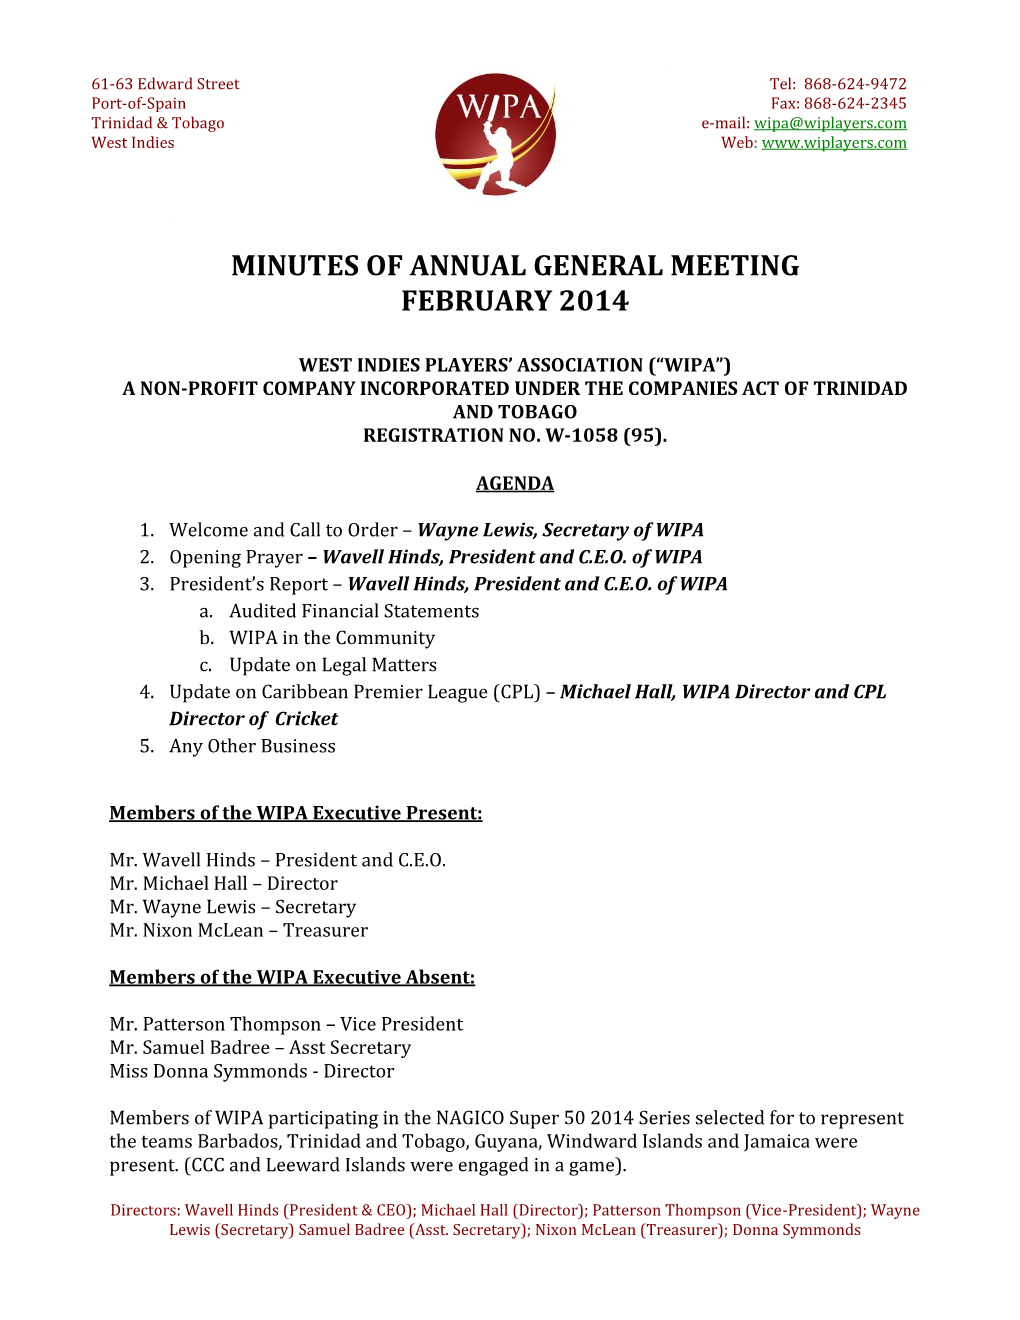 WIPA Annual General Meeting 2014 Minutes